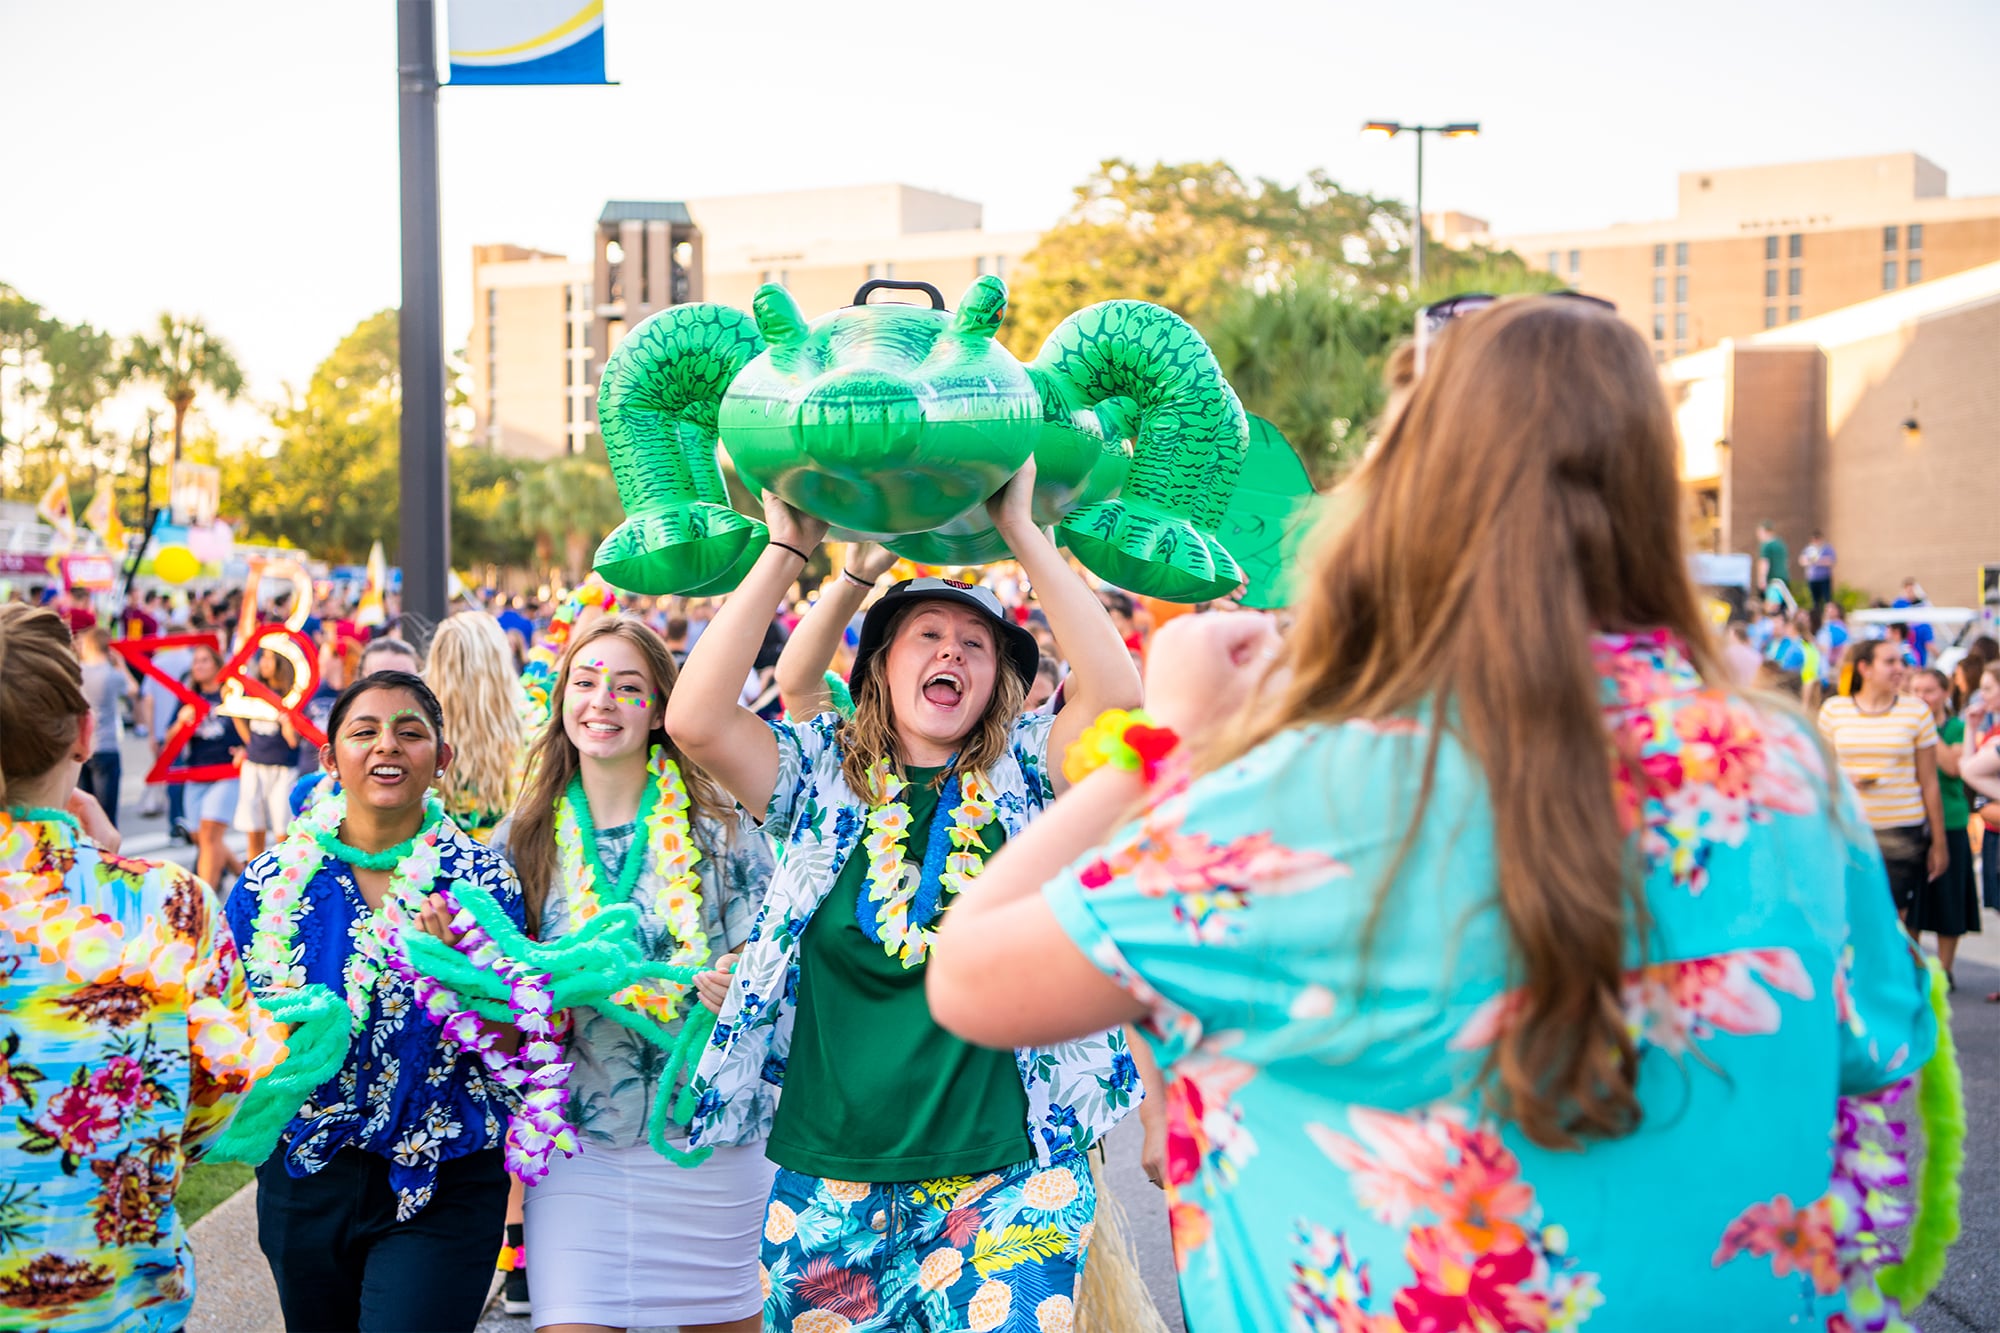 Several members of the Gator collegian carry around a large inflatable gator